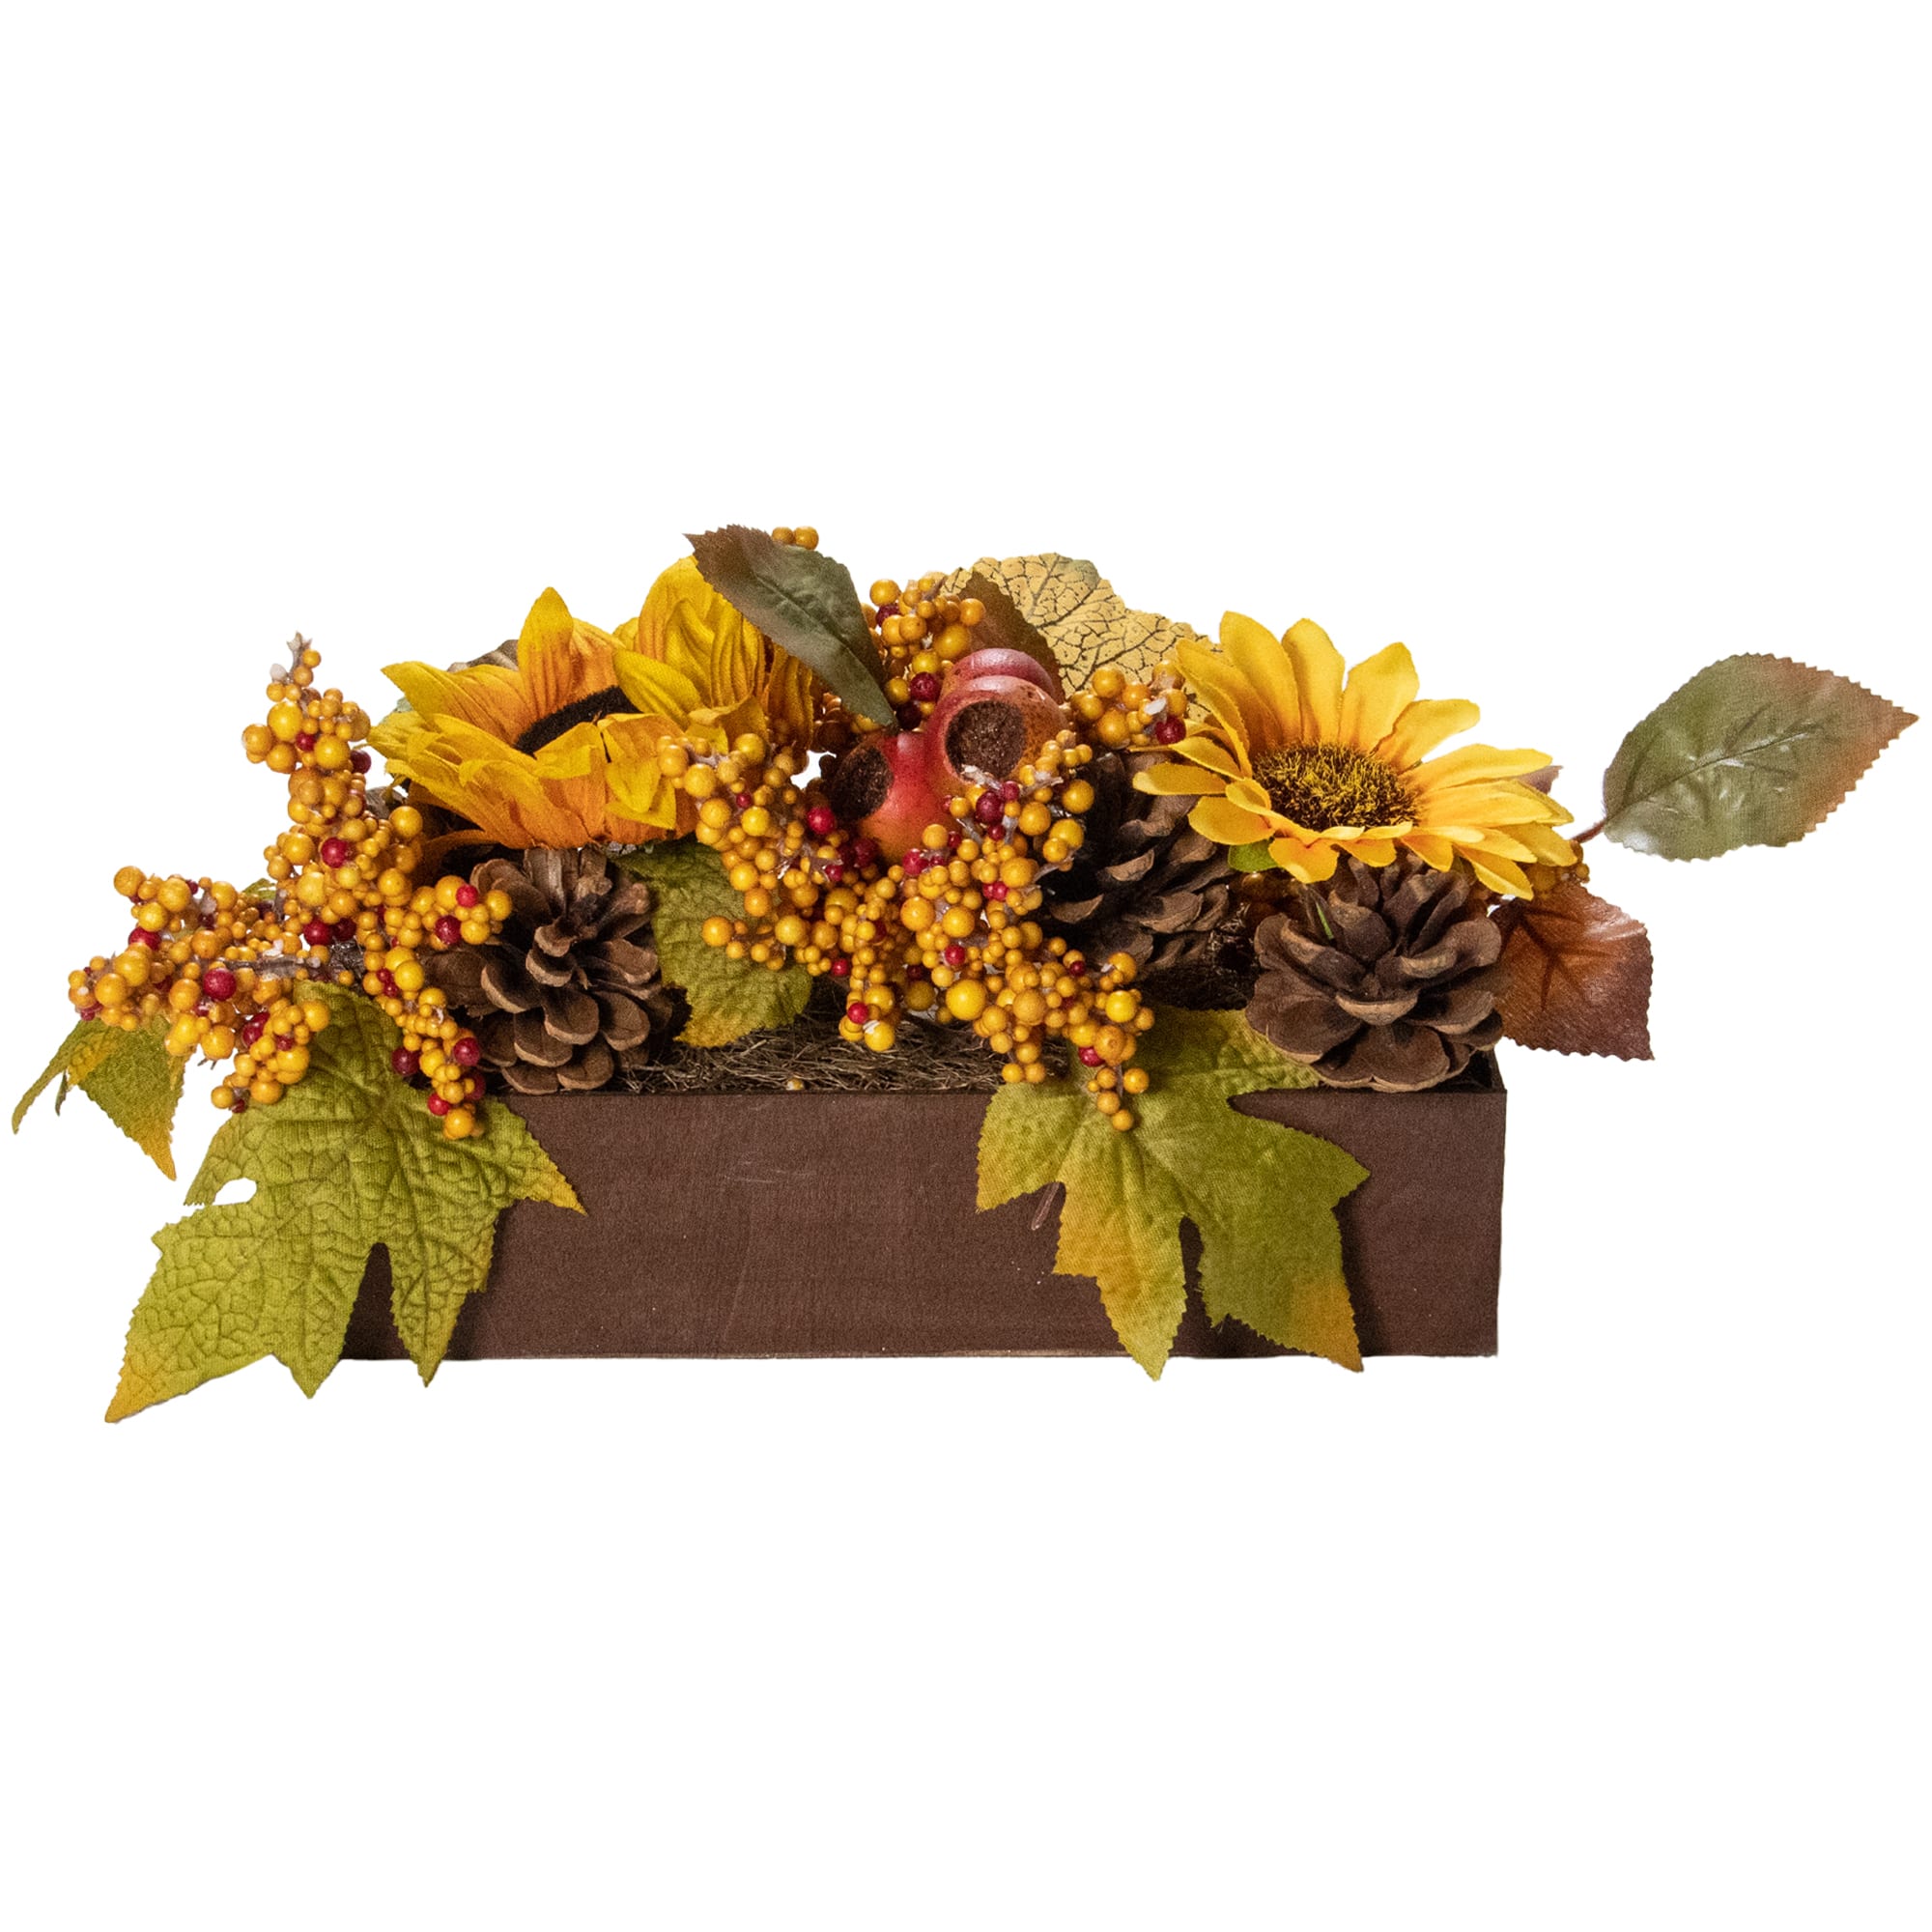 2141620 Gerson Set of 2 Satin Autumn Harvest Floral Bouquets Sunflowers and... 